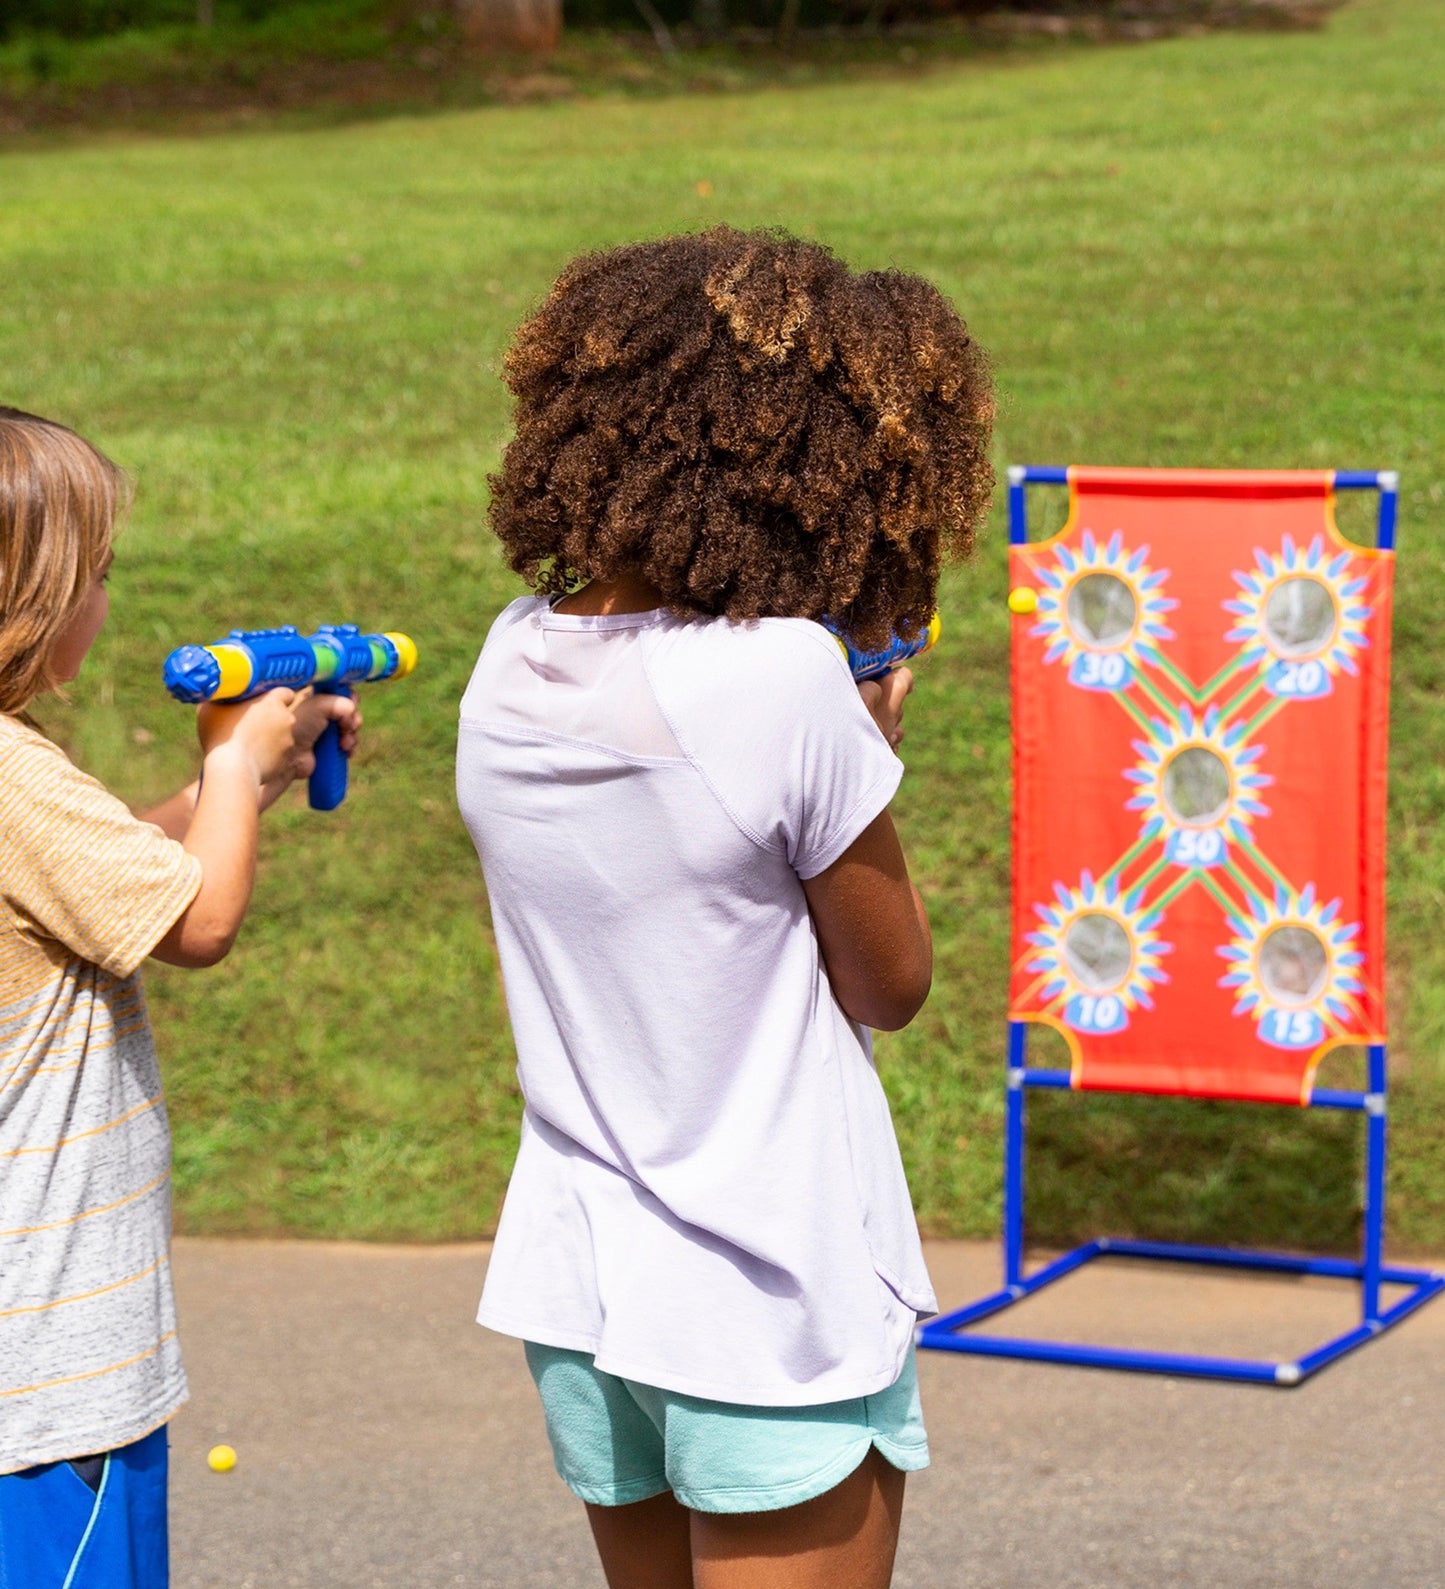 Target Blaster Game Set with 2 Blasters and 24 Foam Balls